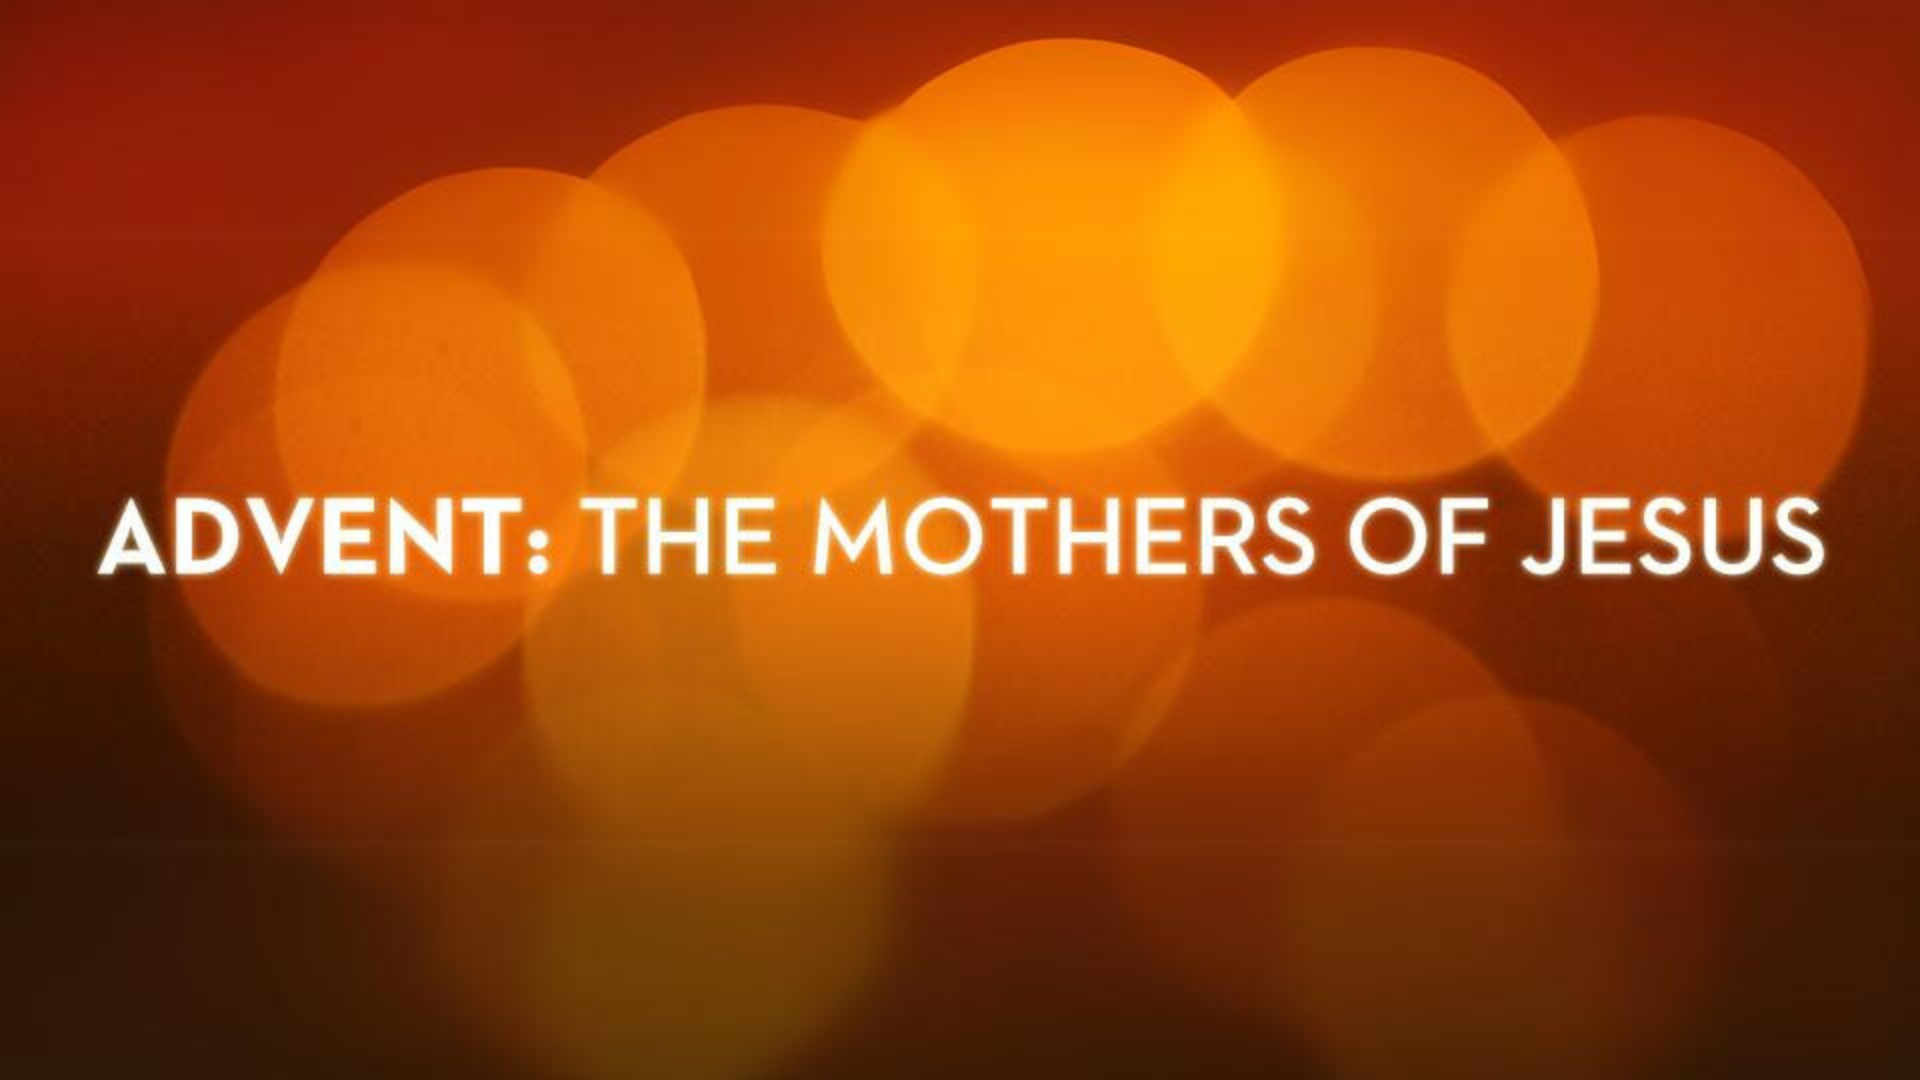 Advent: The "Mothers" of Jesus